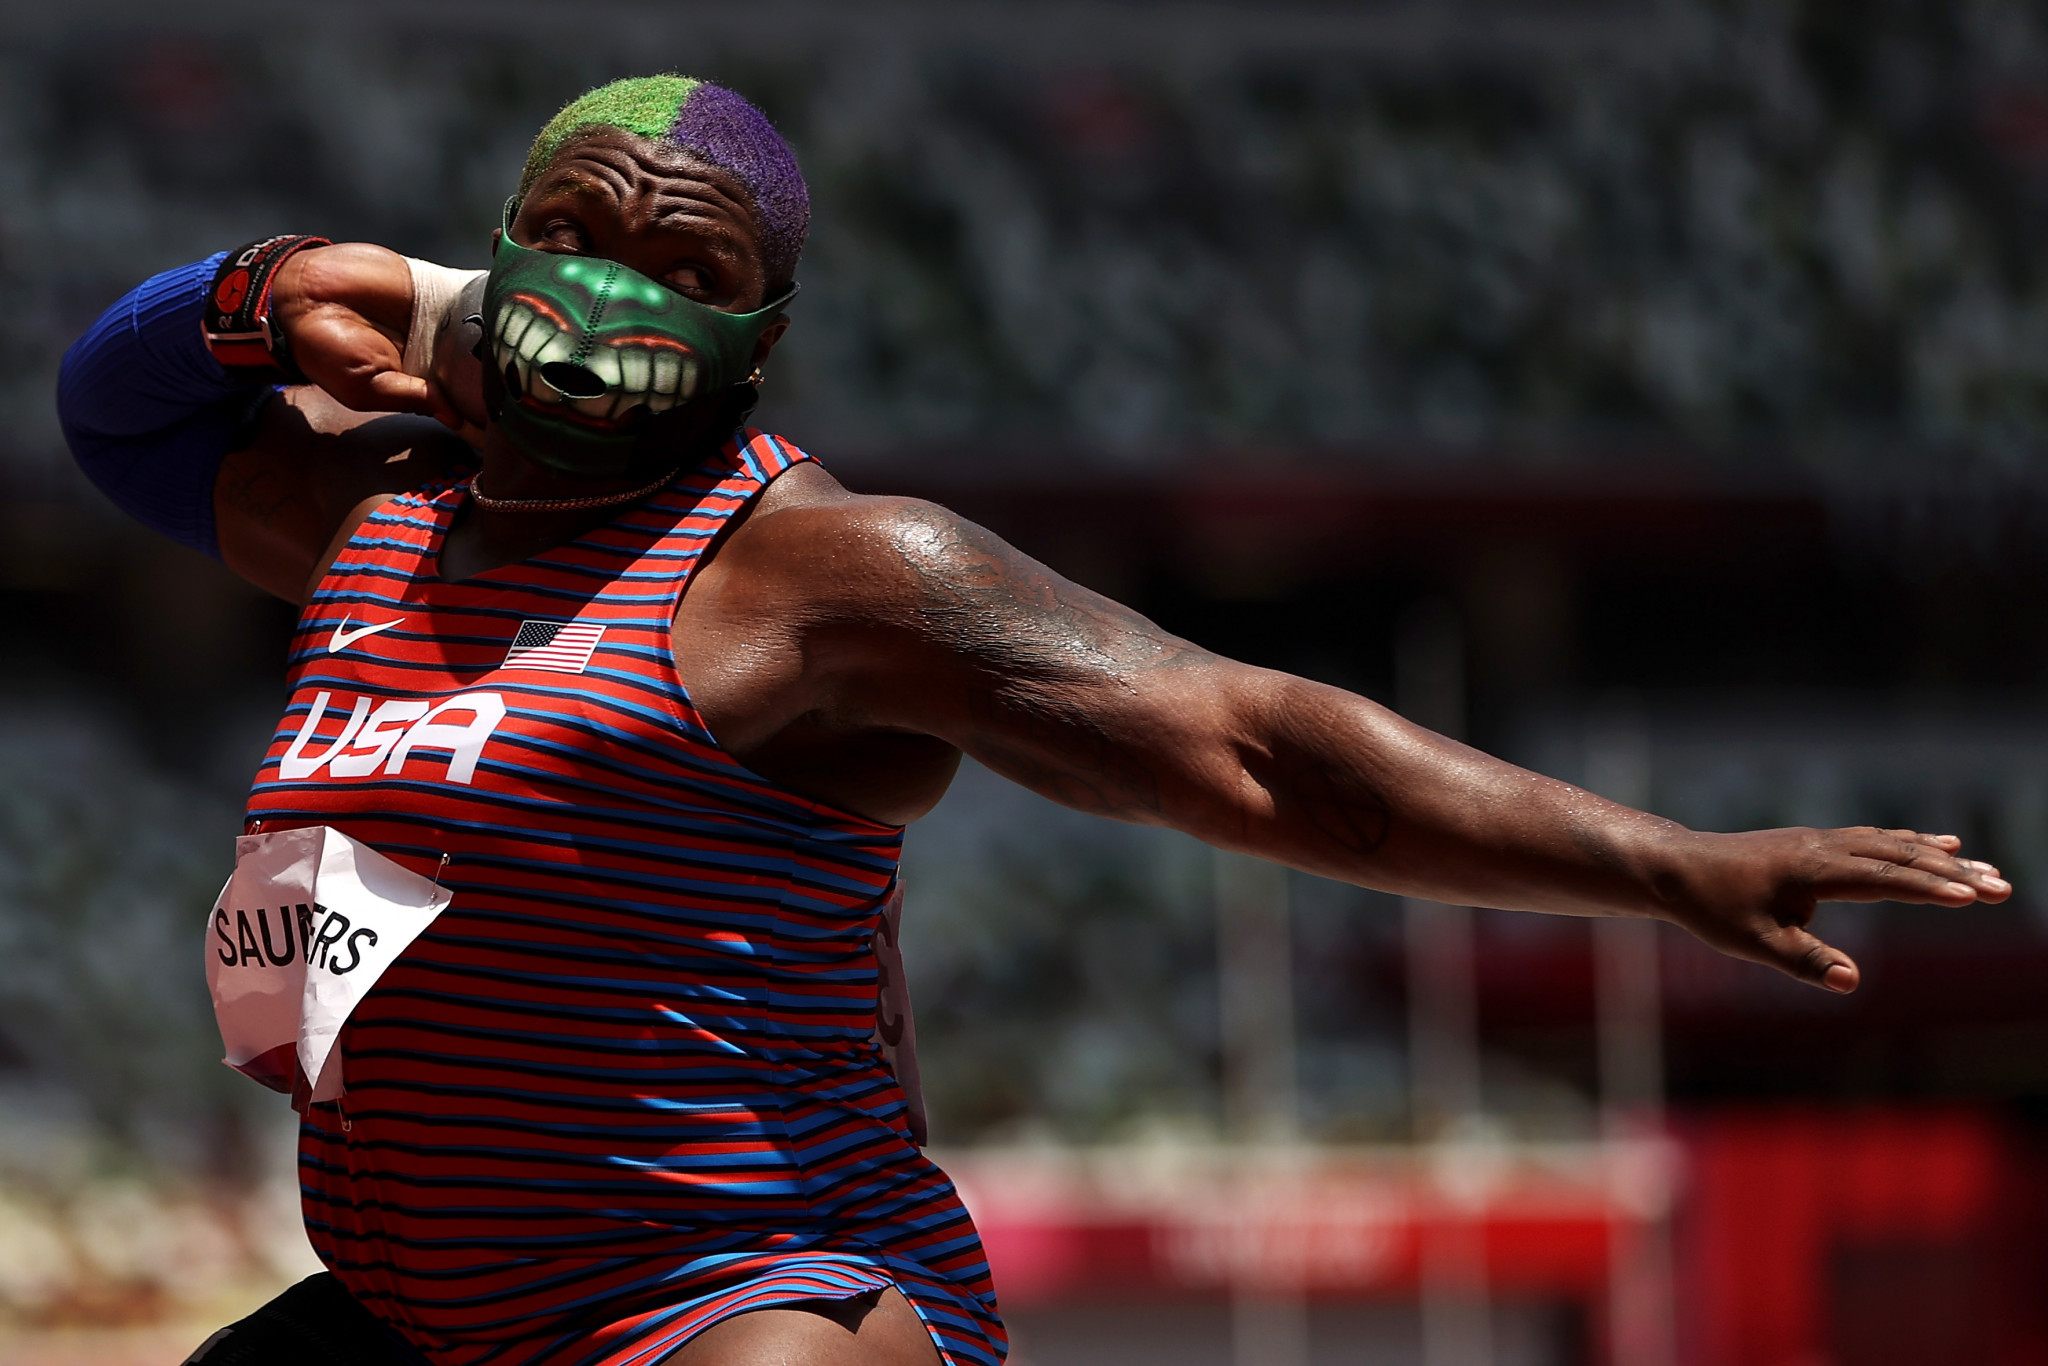 Olympic shot put medallist Raven Saunders says she takes "full responsibility" after being handed an 18-month suspension for committing three whereabouts failures in the space of one year ©Getty Images  